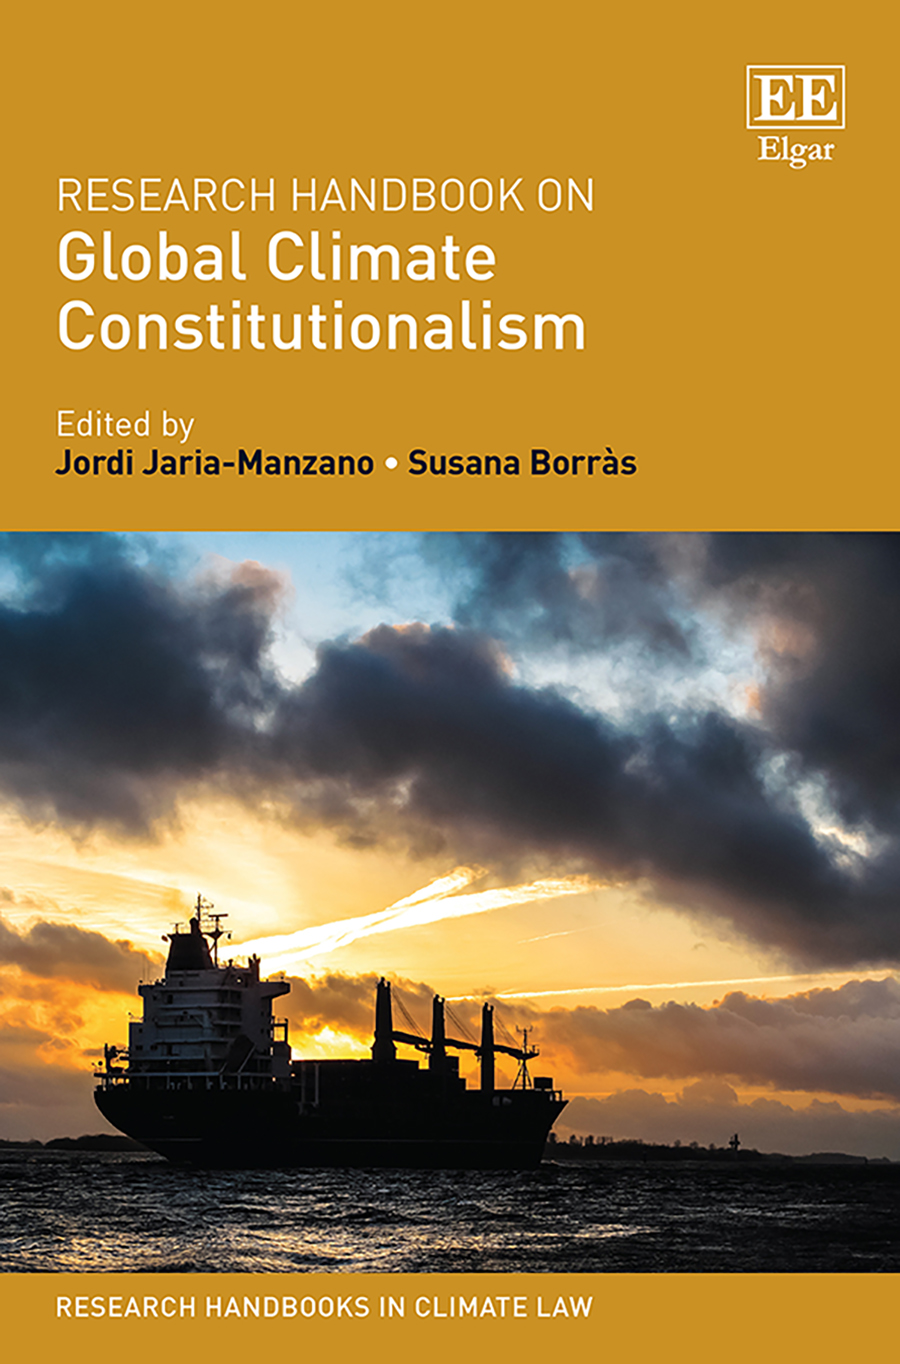 Research Handbook on Global Climate Constitutionalism